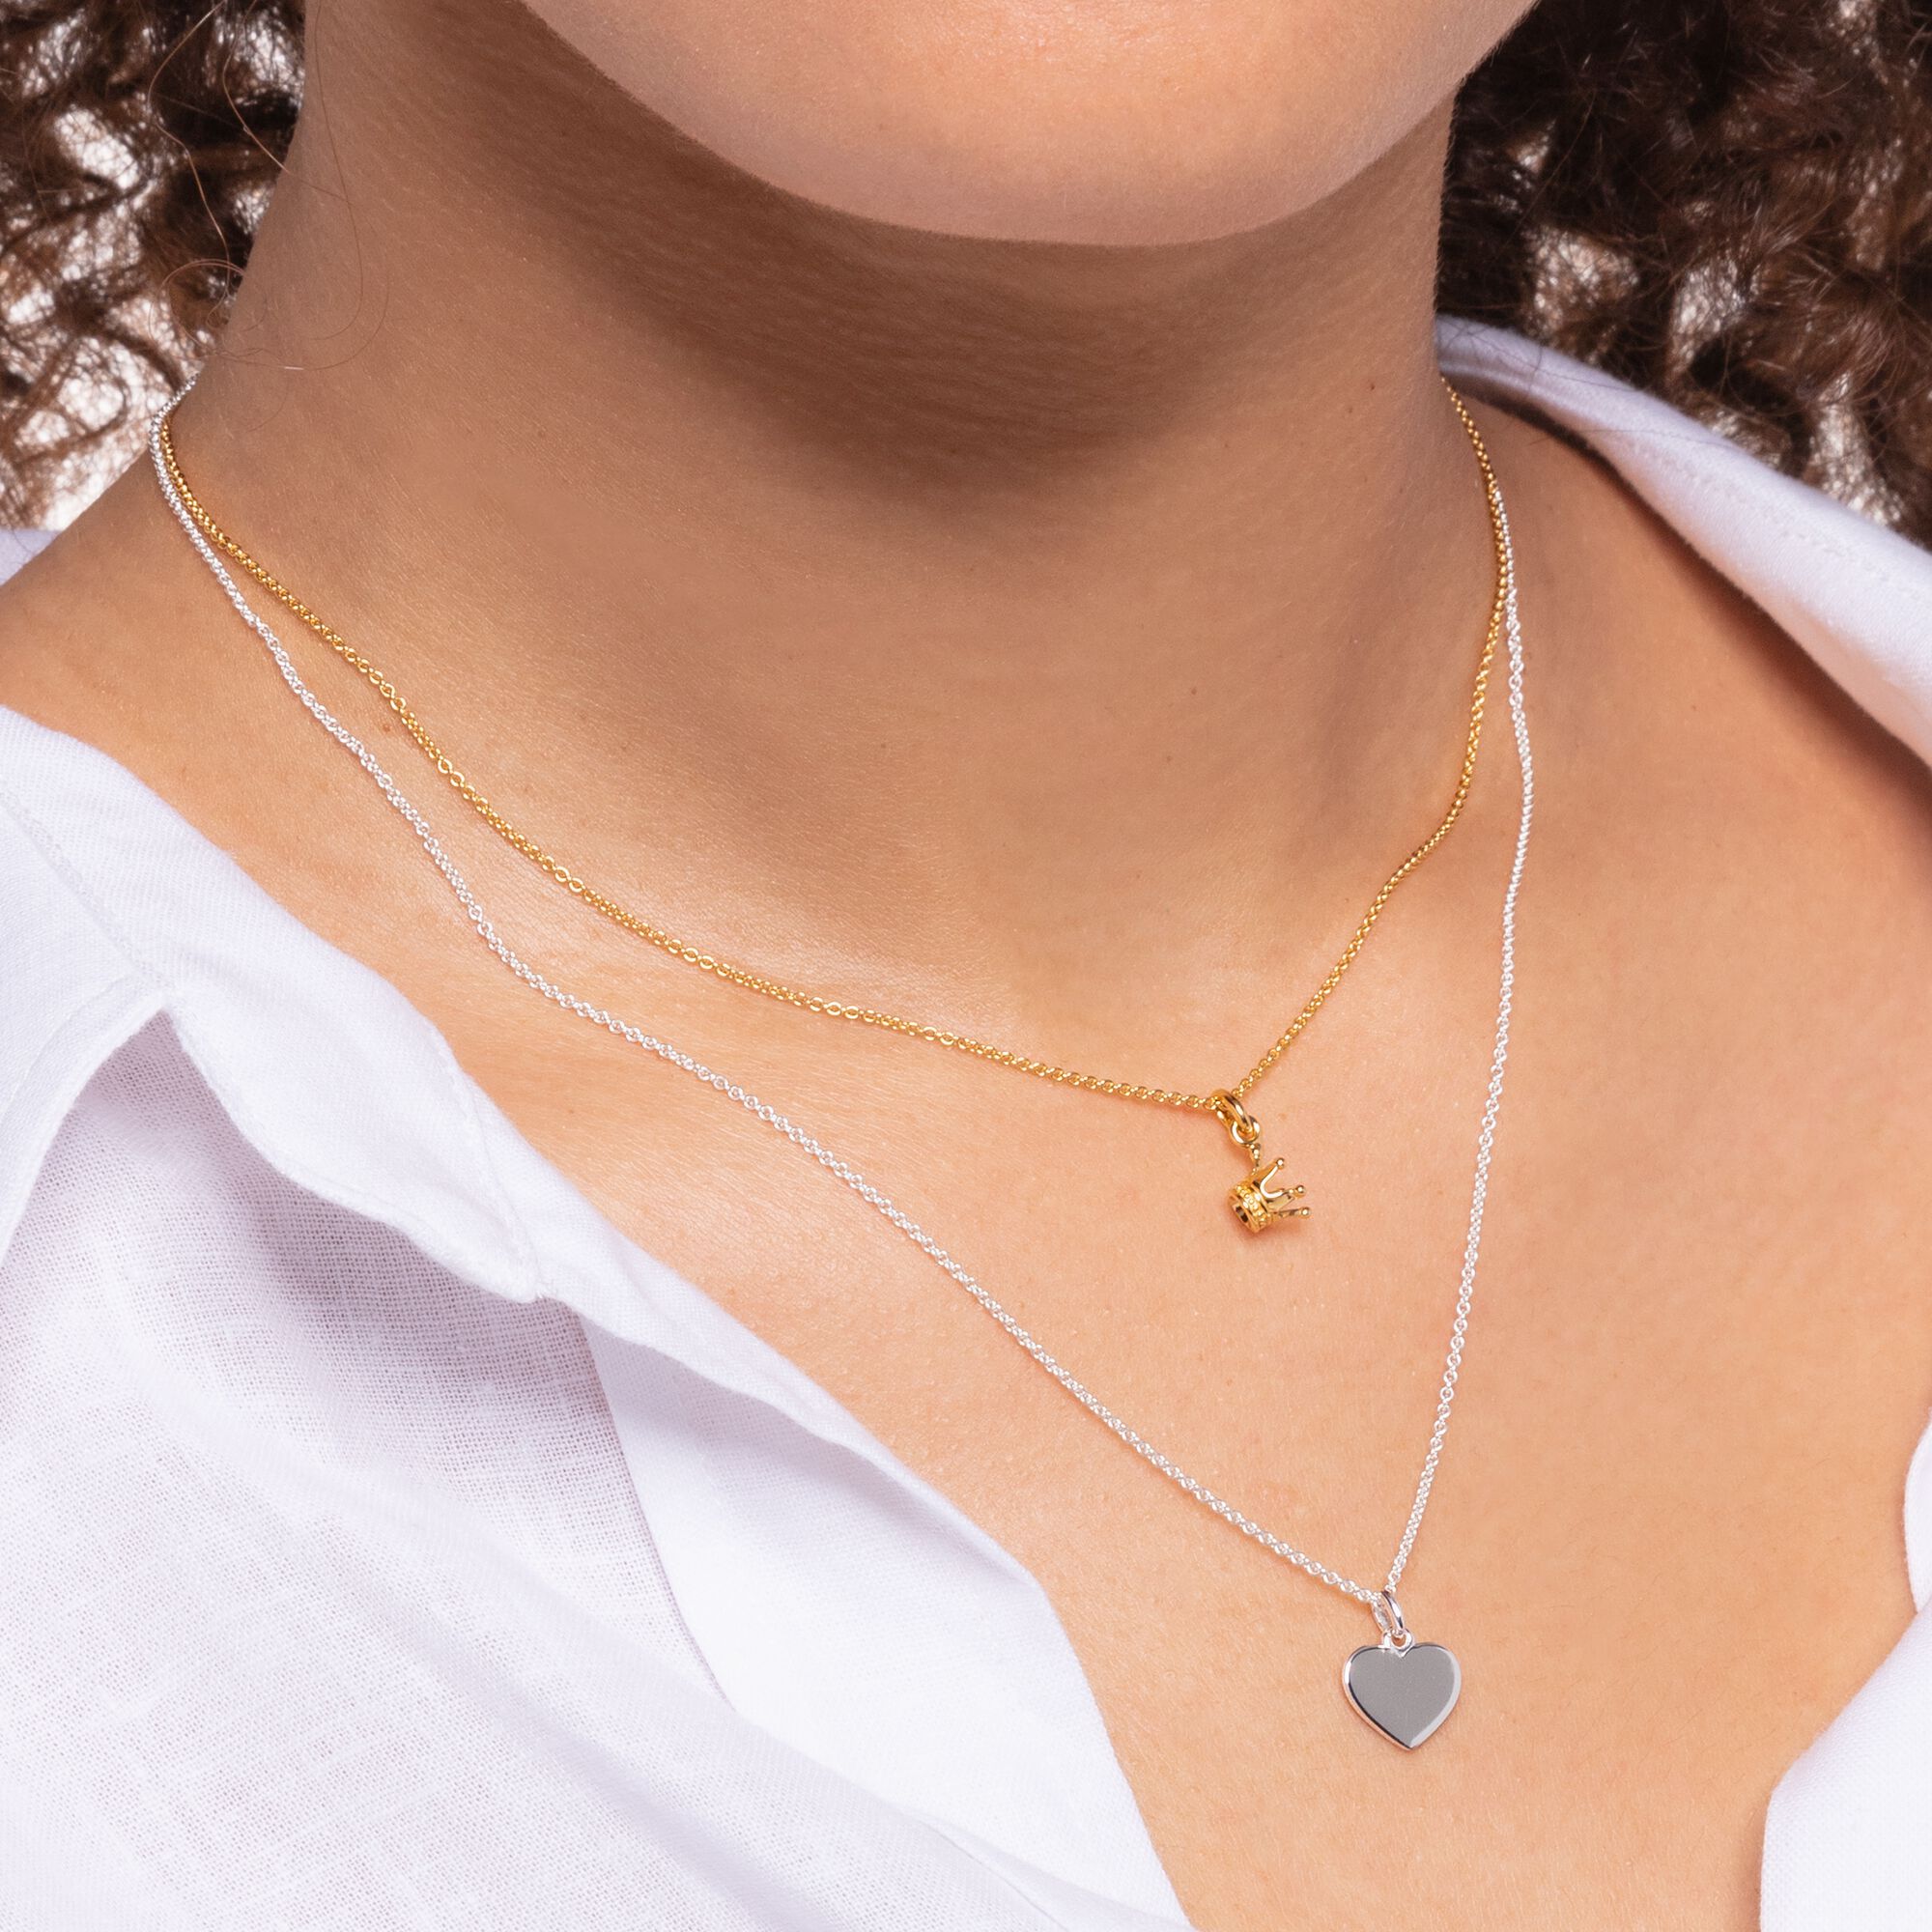 Necklace with heart pendant – SABO THOMAS